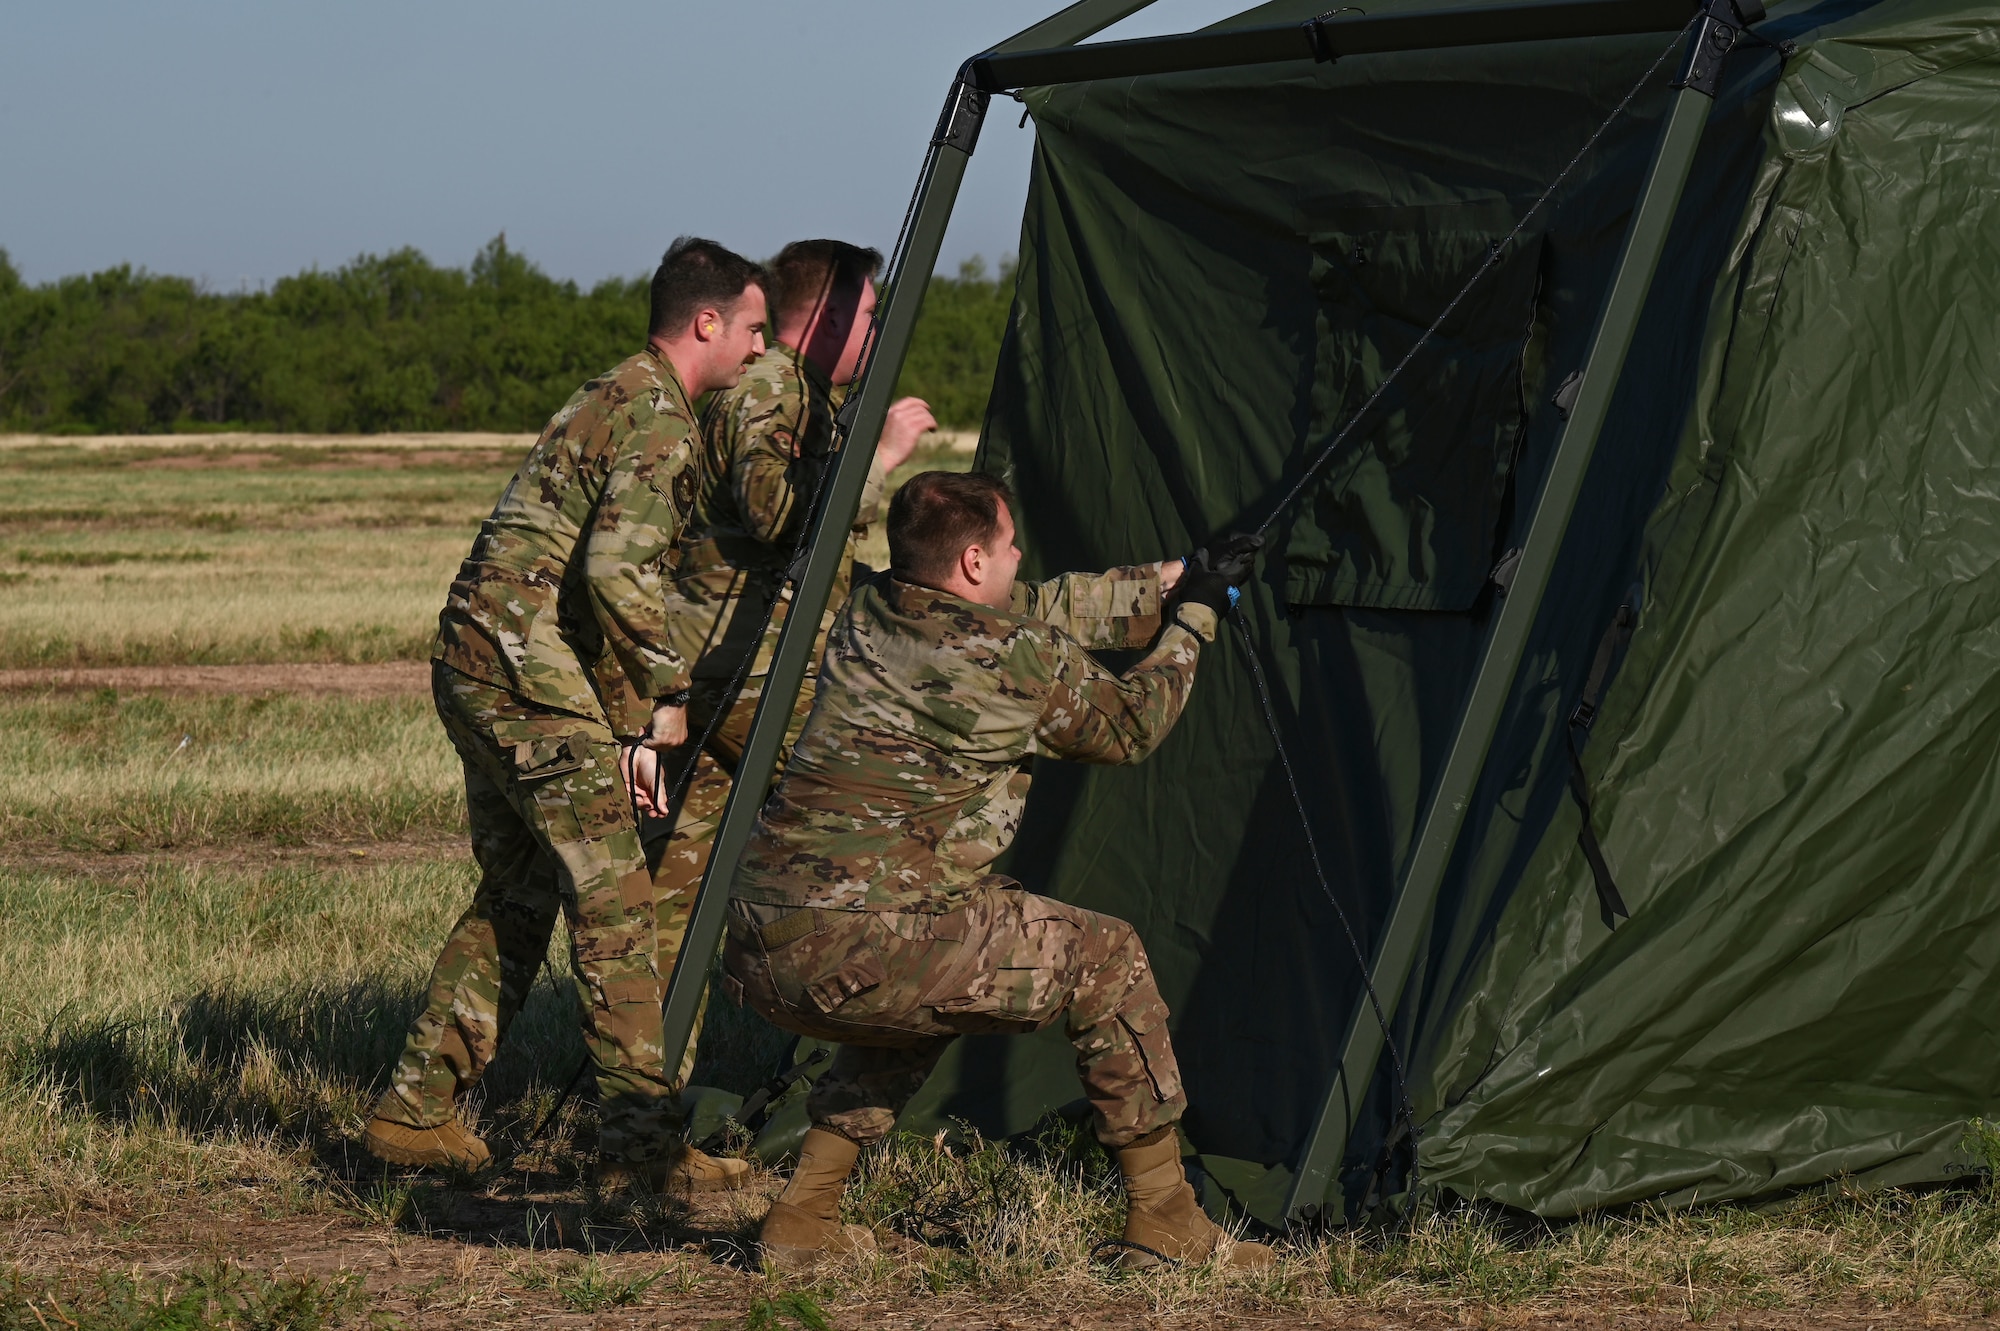 Airmen from the 317th Airlift Wing set up tents for the Tactical Operating Center at Dyess Air Force Base, Texas, Sept. 19, 2023. The TOC is designed for use in areas where established operating centers may not be available. (U.S. Air Force photo by Senior Airman Sophia Robello)